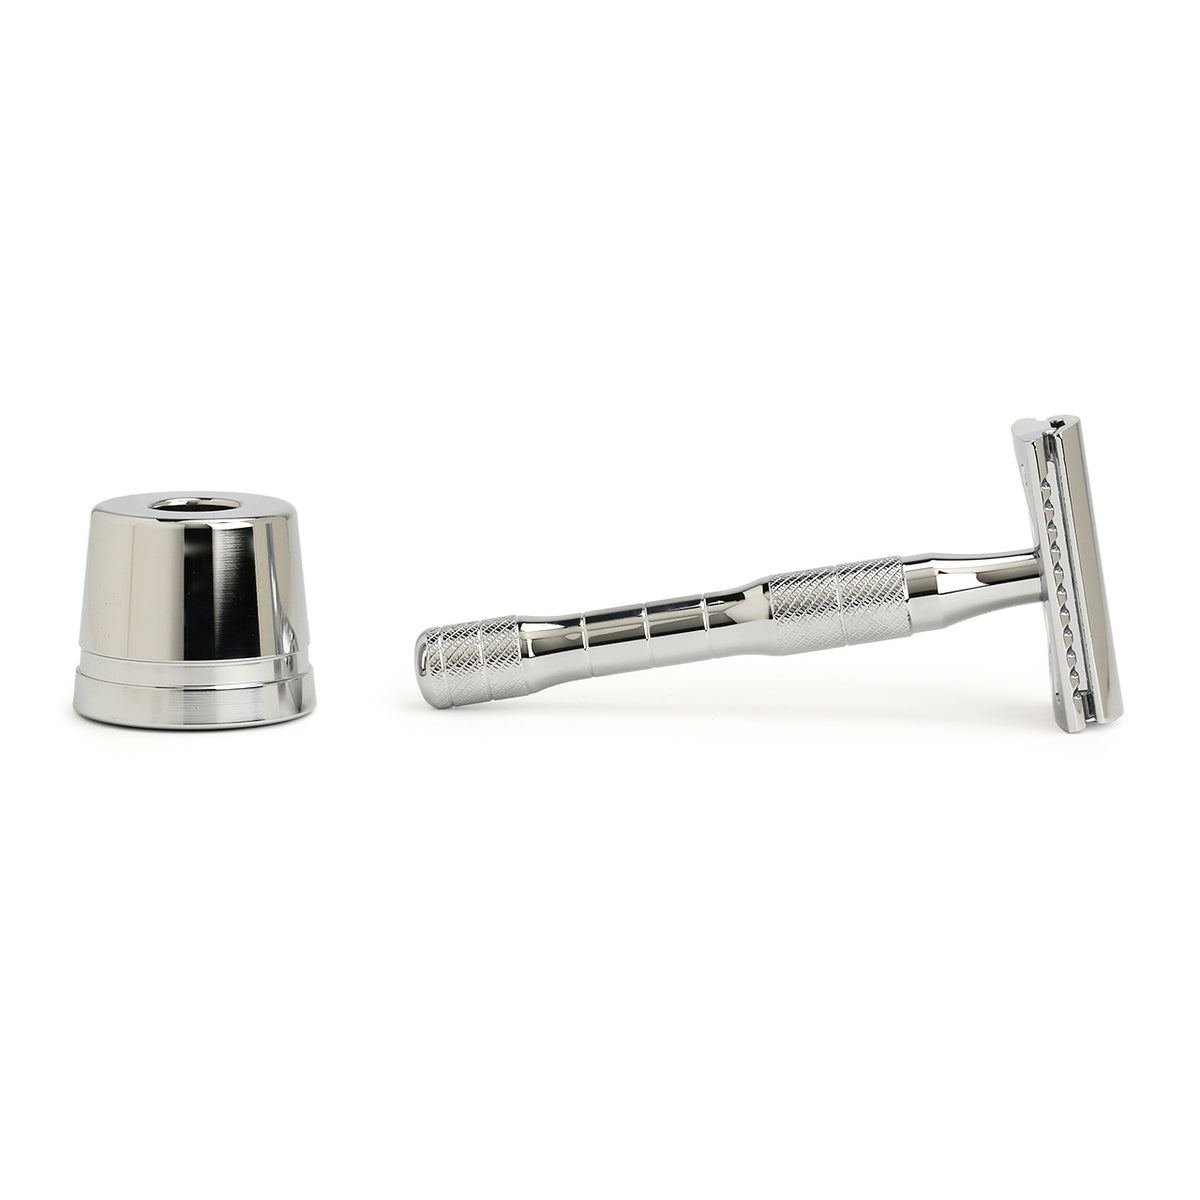 Daily Shaver with chrome finish is a three piece razor and comes with a heavy base-style stand